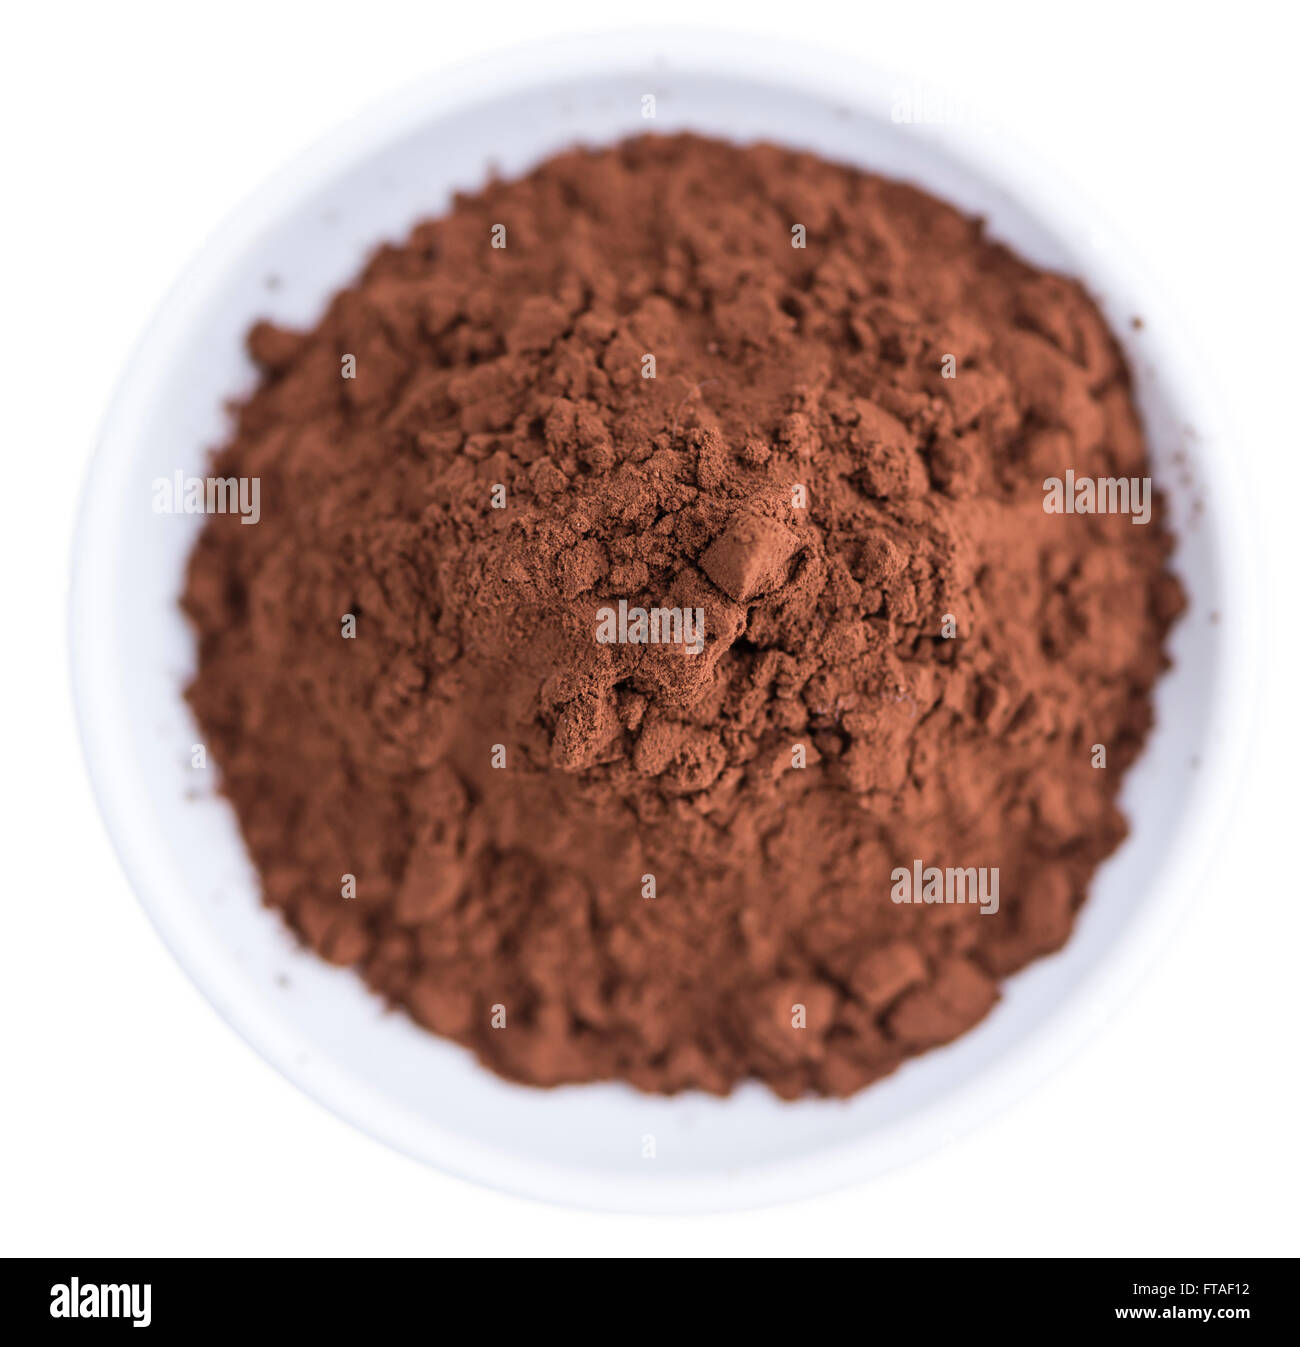 Portion of Cocoa powder (selective focus) as detailed close-up shot isoalted on white background Stock Photo